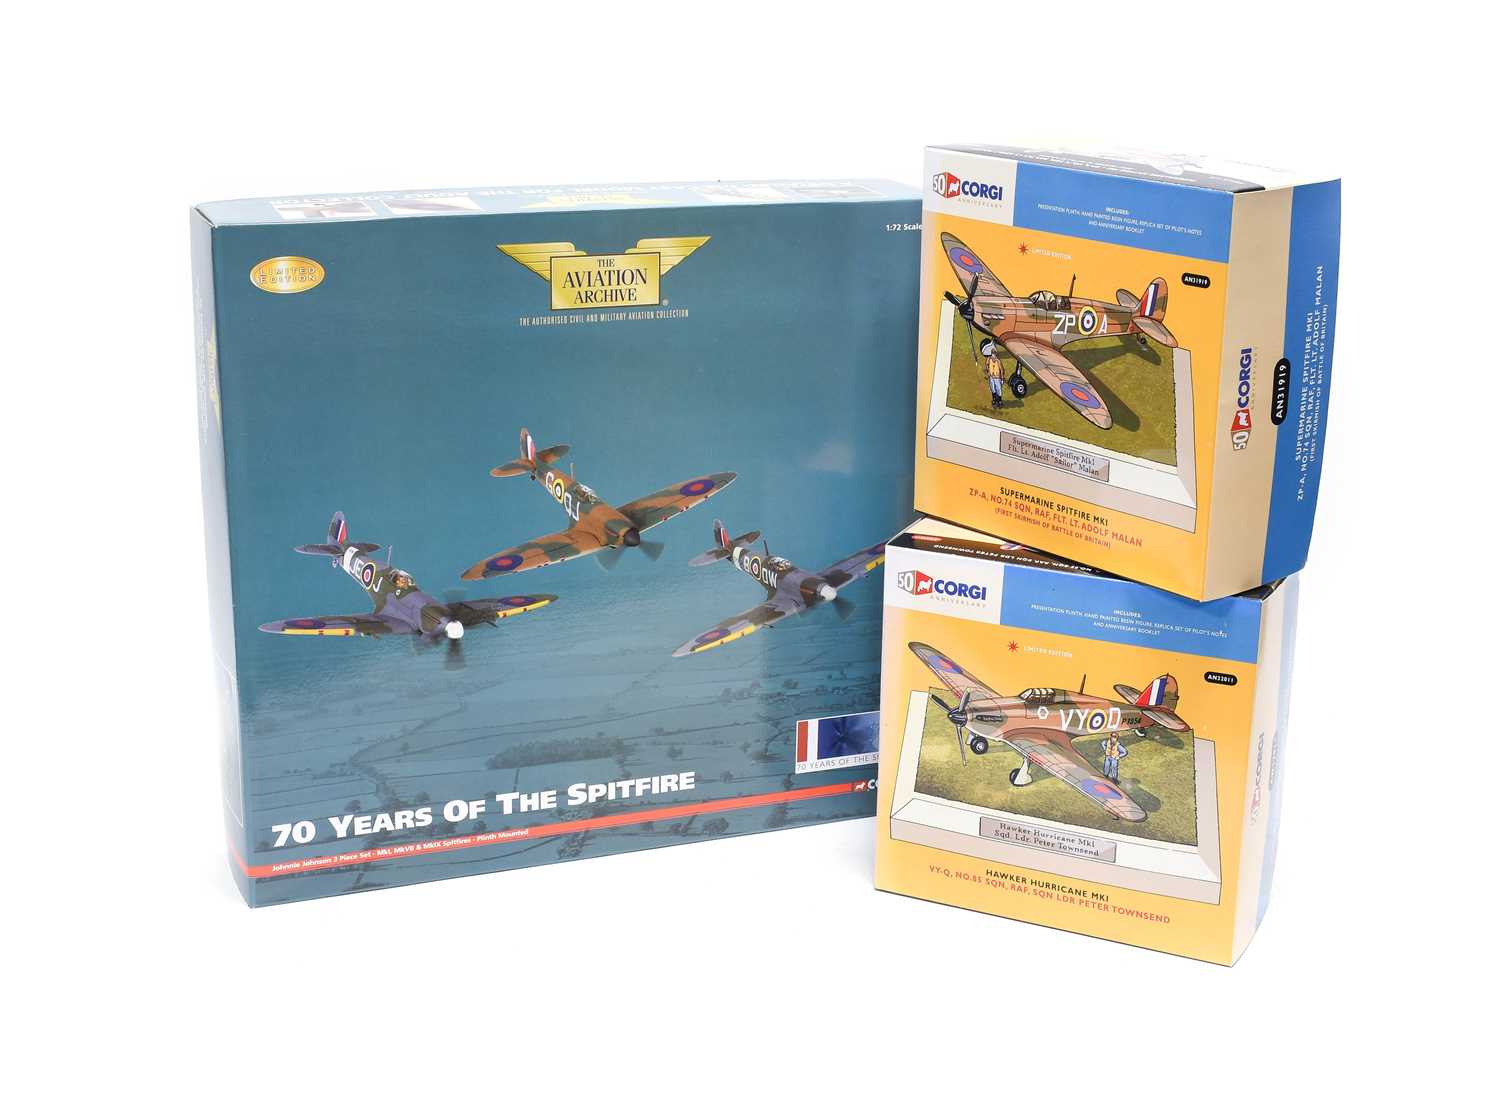 Corgi Aviation Archive 1:72 Scale AA99189 70 Years Of The Spitfire 3 Piece Set